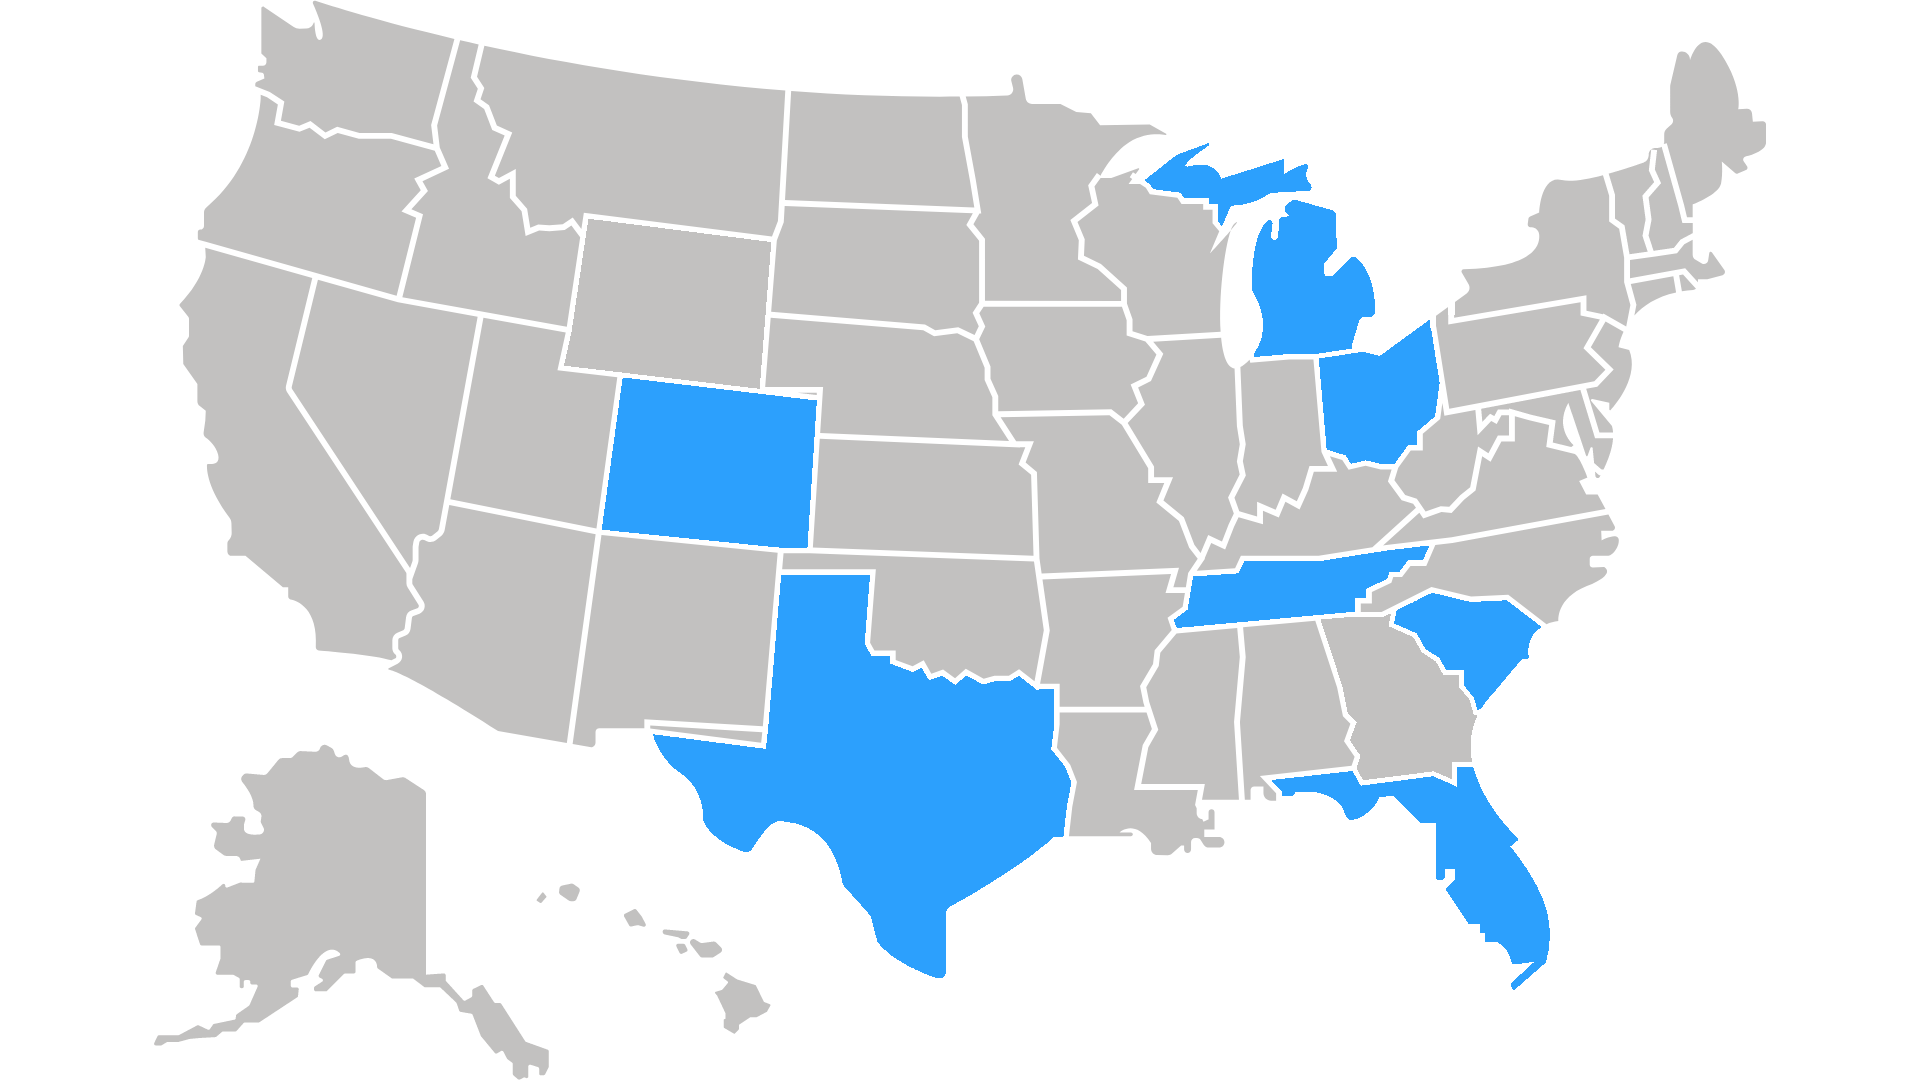 a map of the United States showing what states appli home loans is available